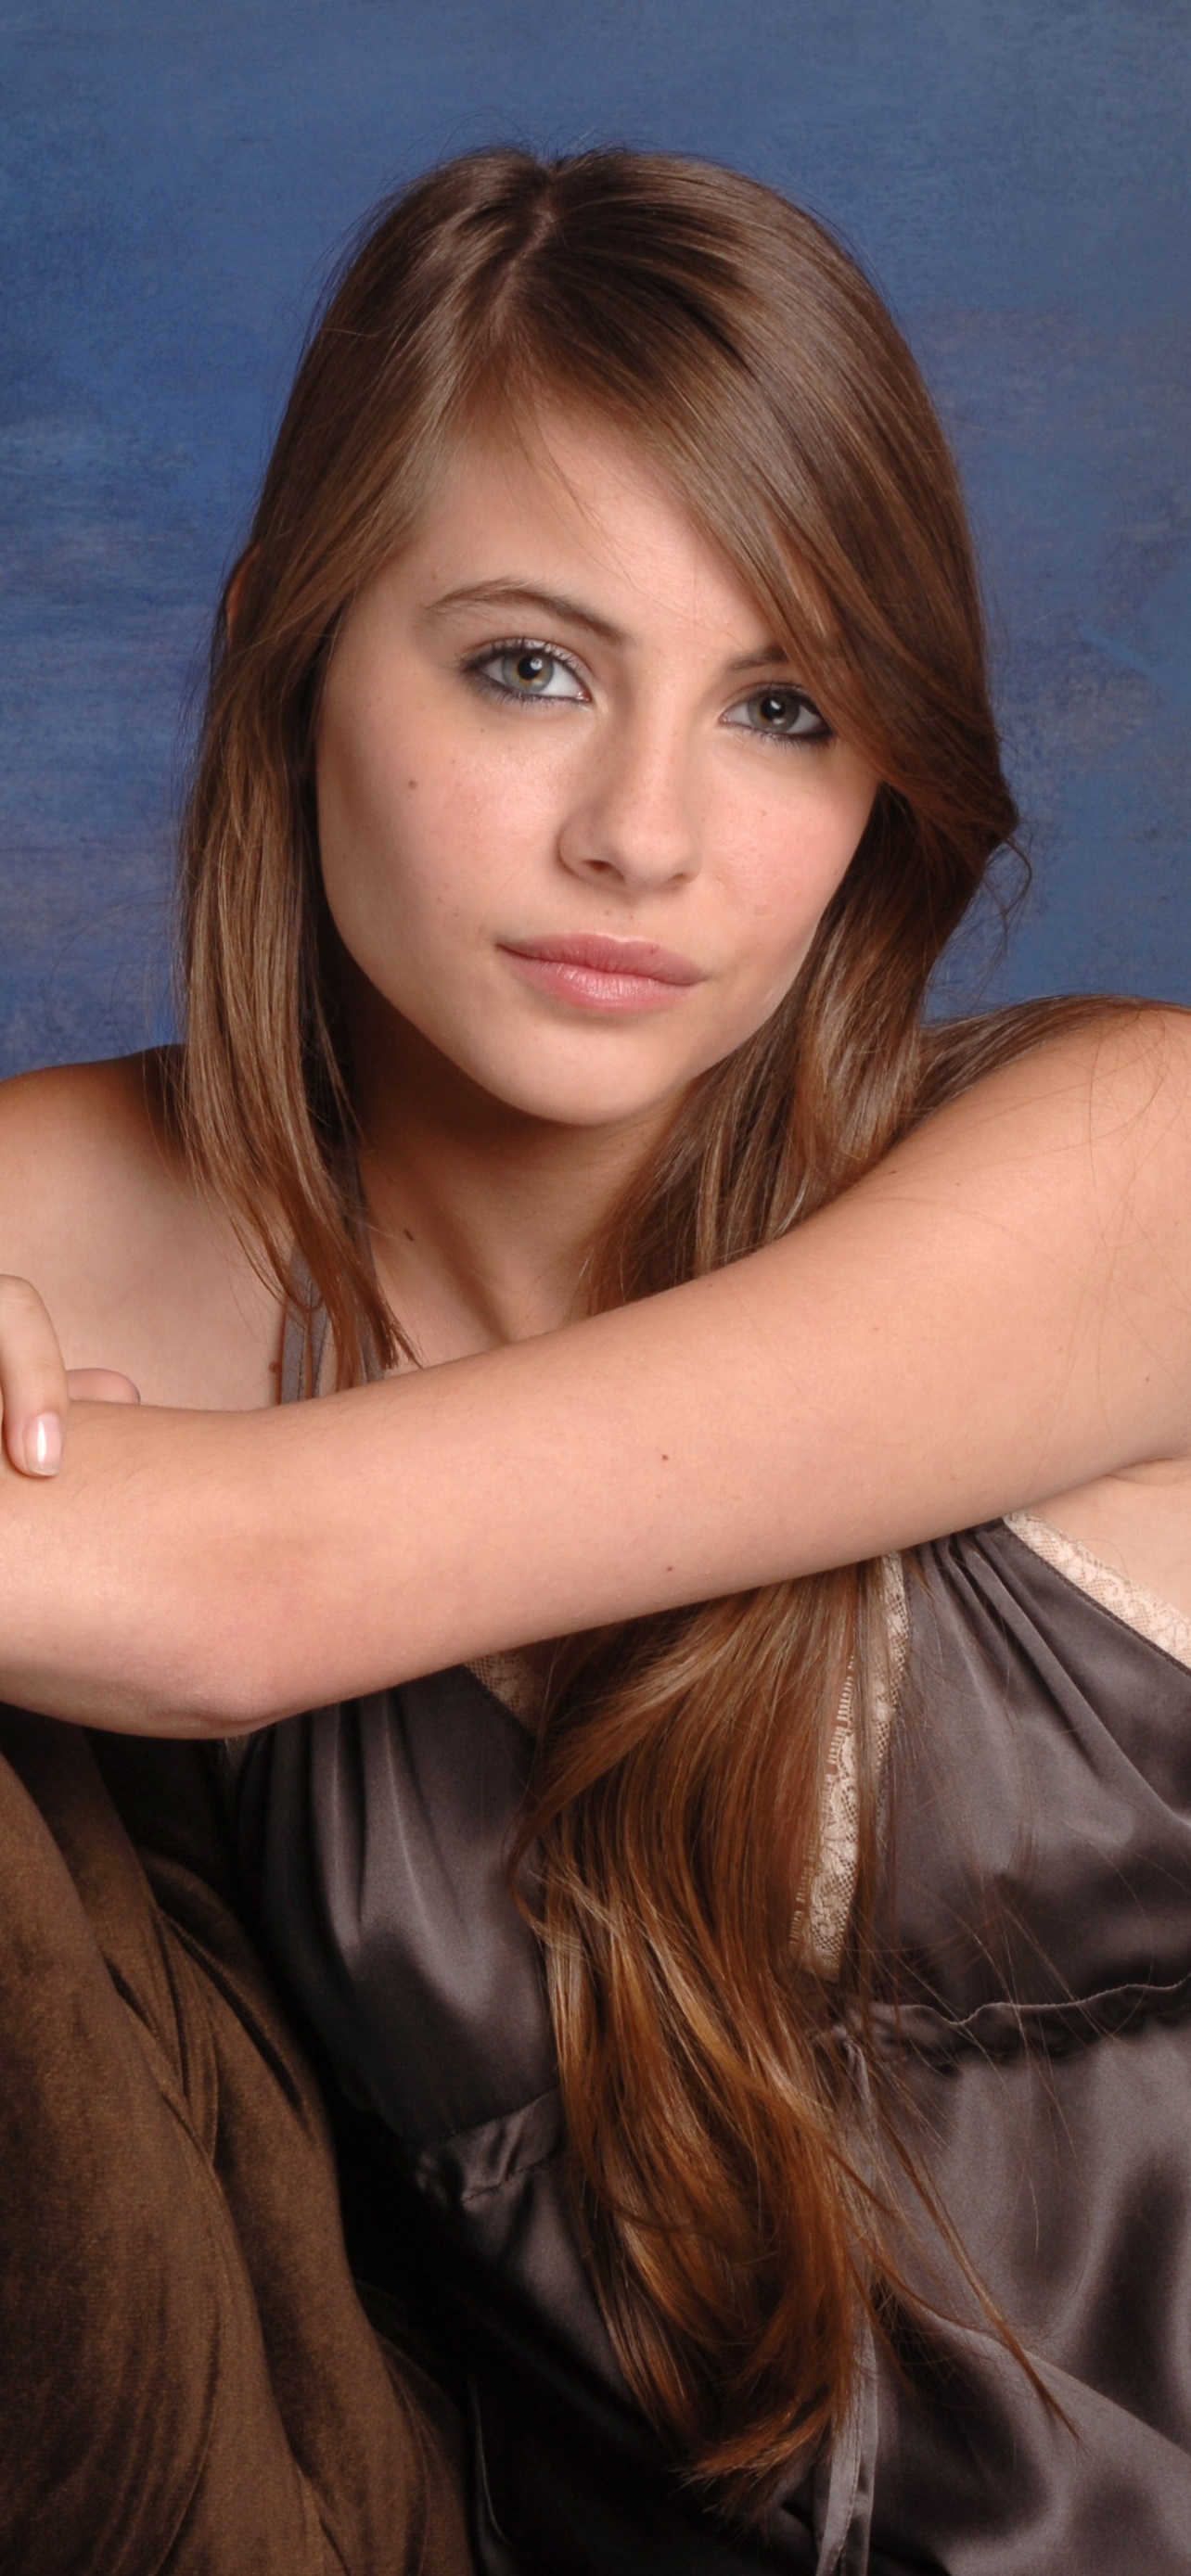 Brunette Willa Holland American Actress Wallpapers